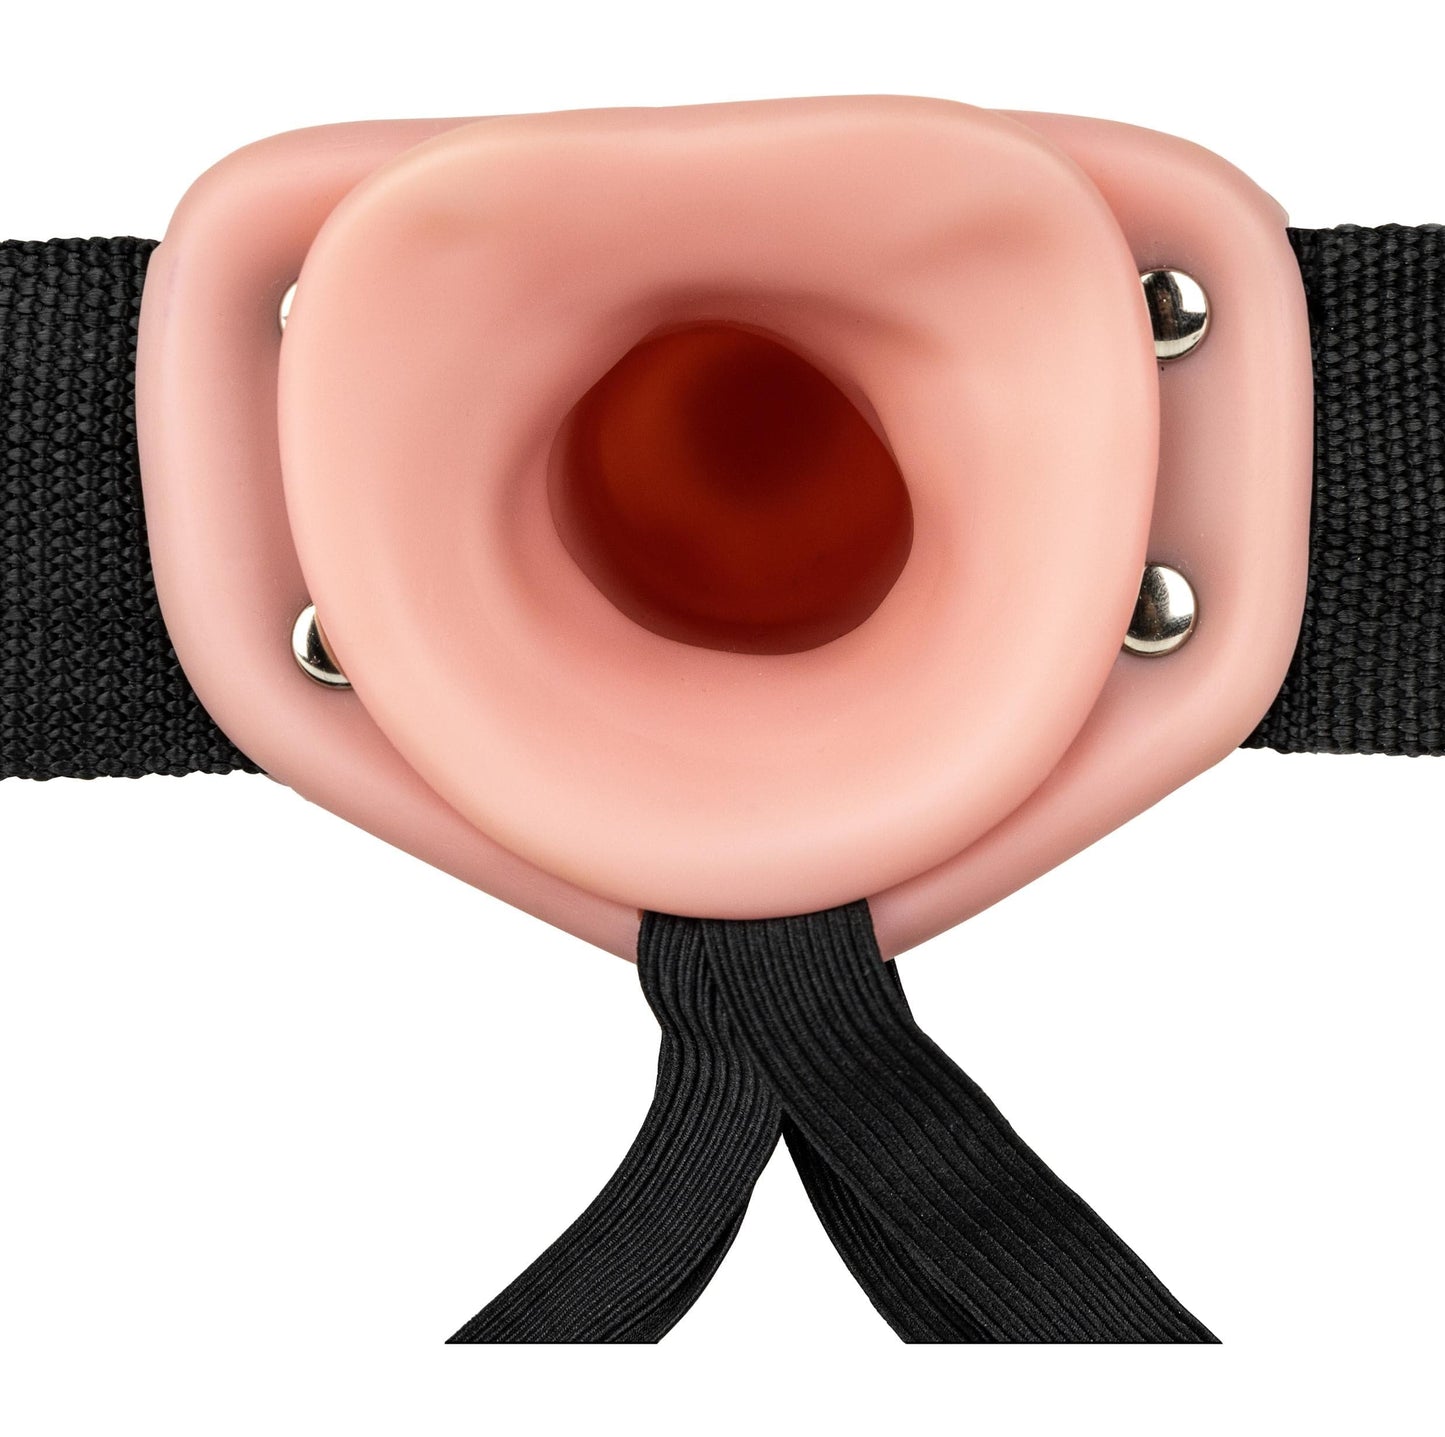 hollow strap on without balls 8 inch flesh